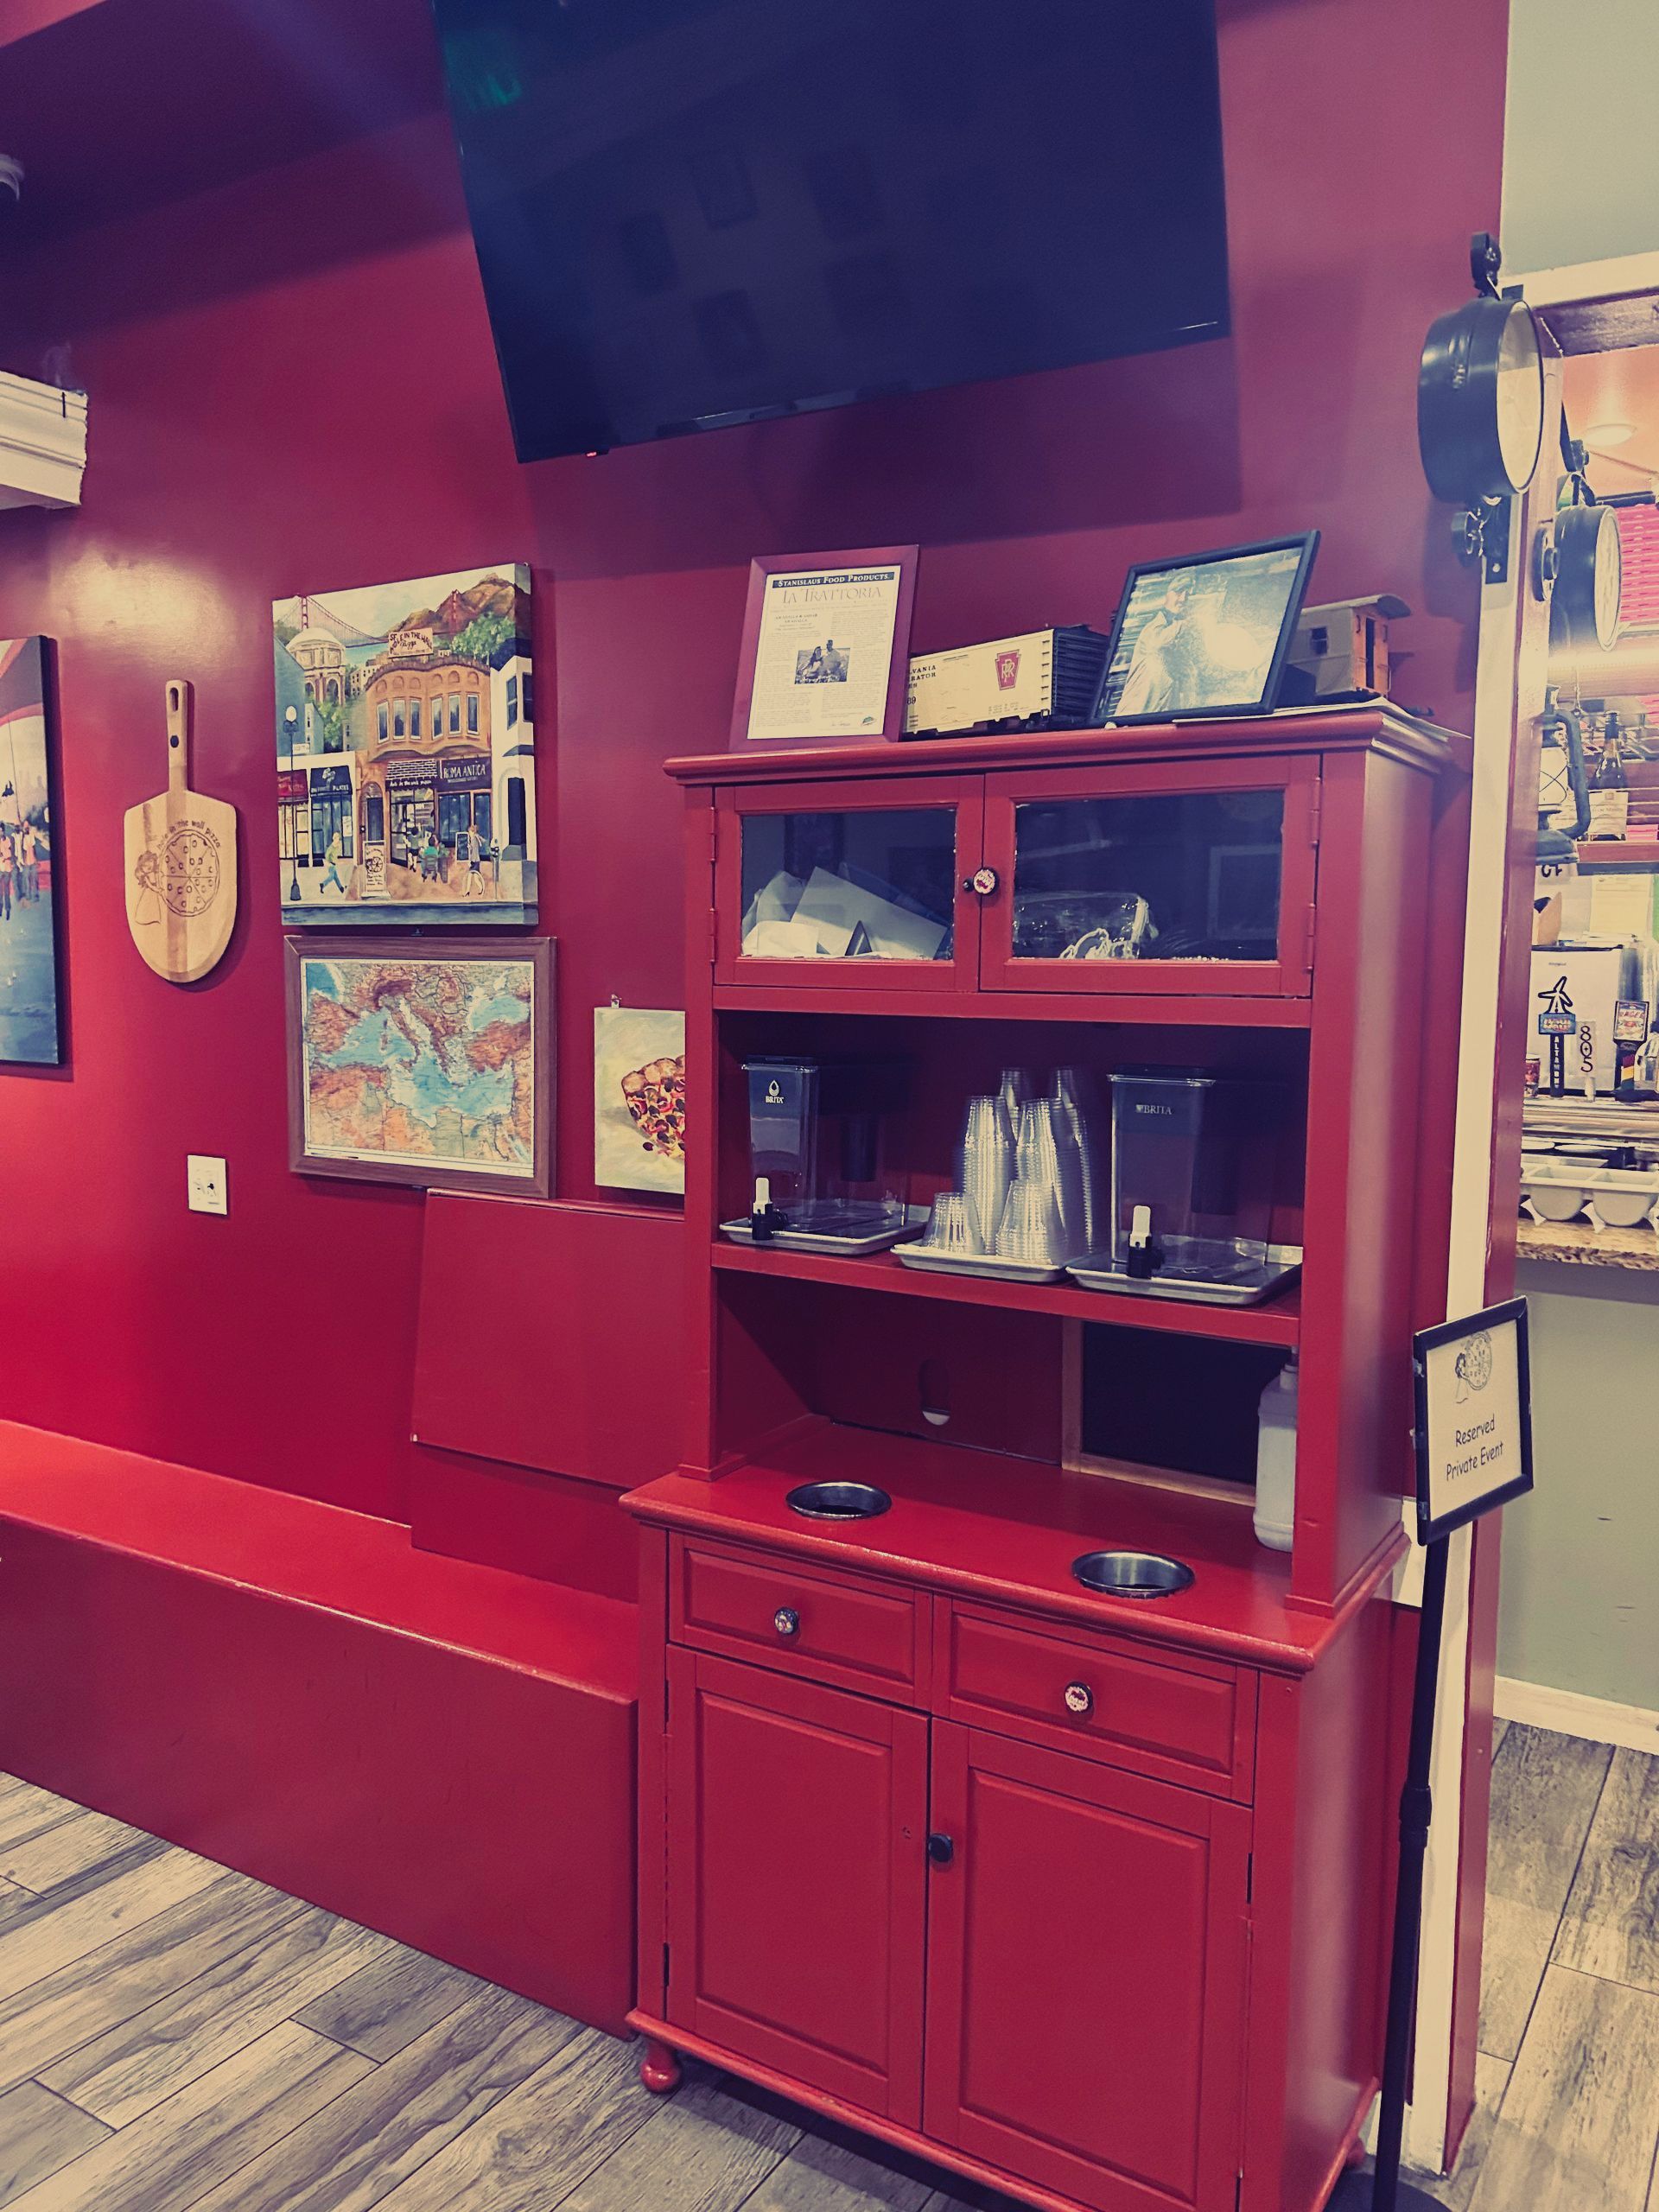 A red cabinet in a room with a tv on the wall.